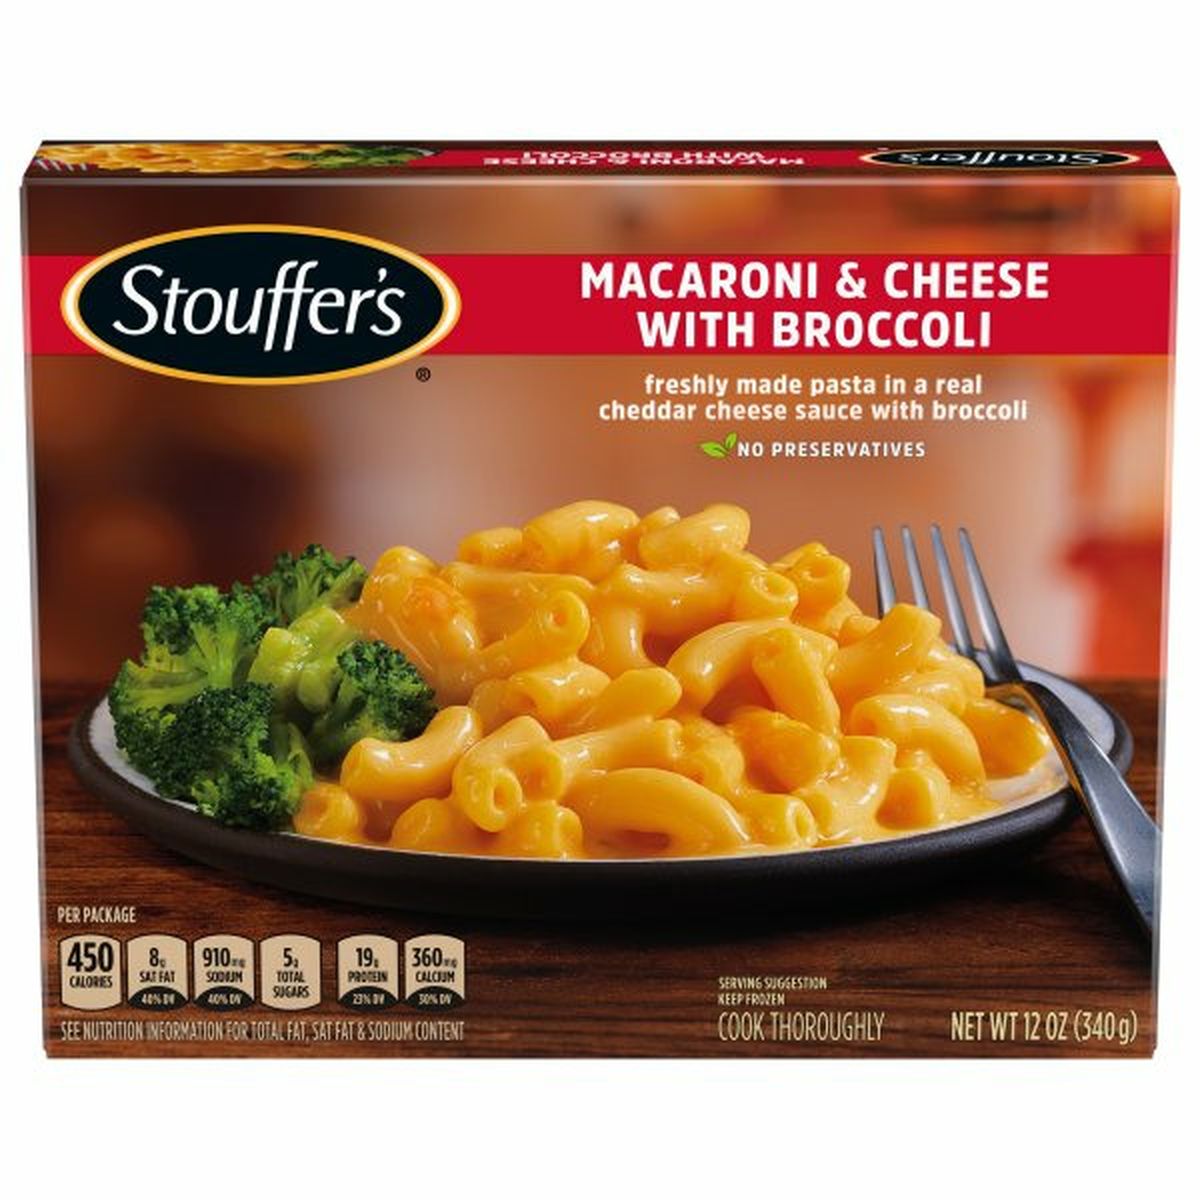 Calories in Stouffer's Macaroni & Cheese, with Broccoli